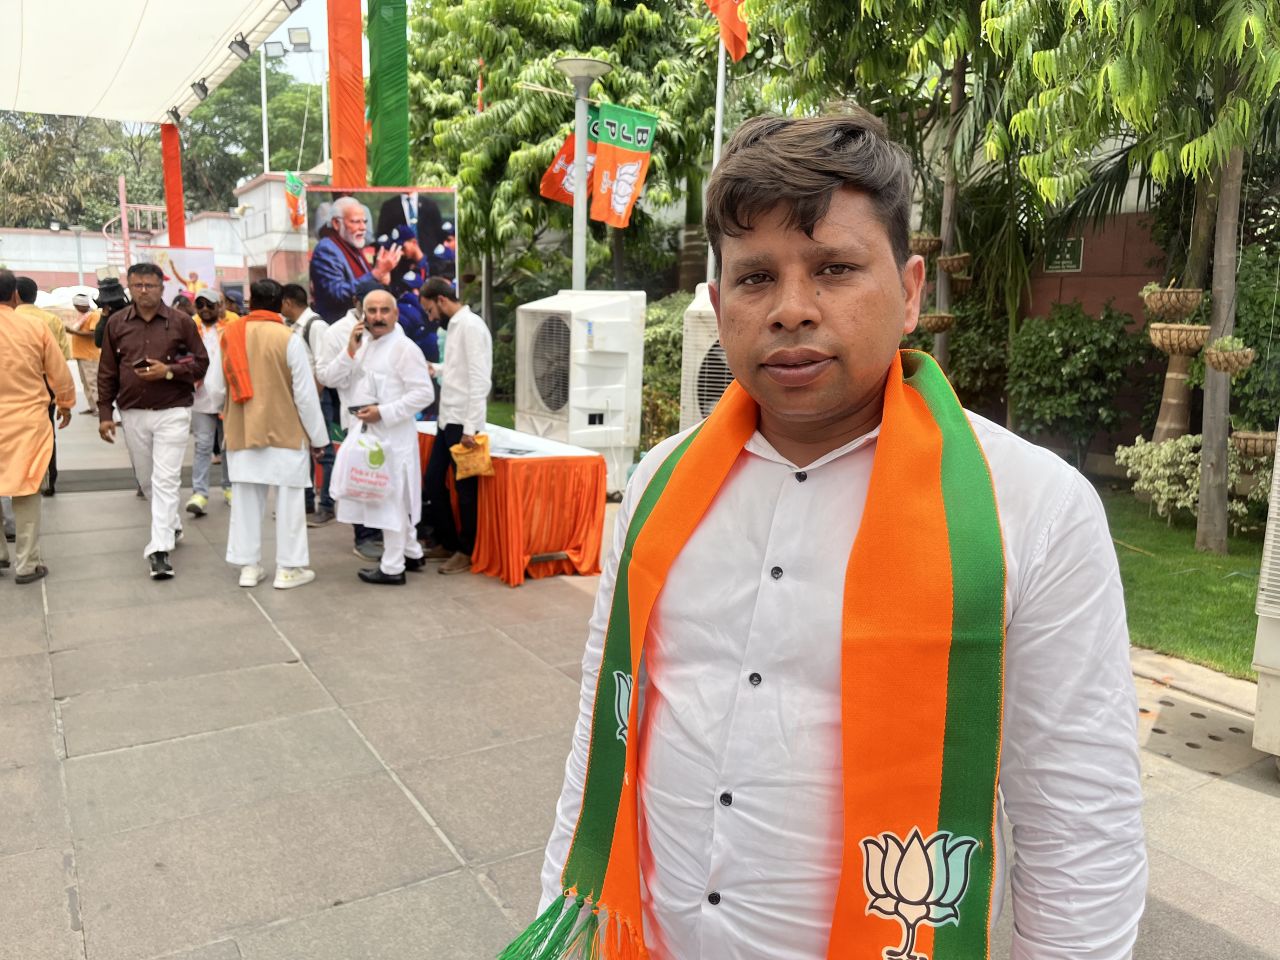 Rajgopal Kashyap, 28, Uttar Pradesh’s Baghpat, party worker who traveled to Delhi specifically to witness the election results.